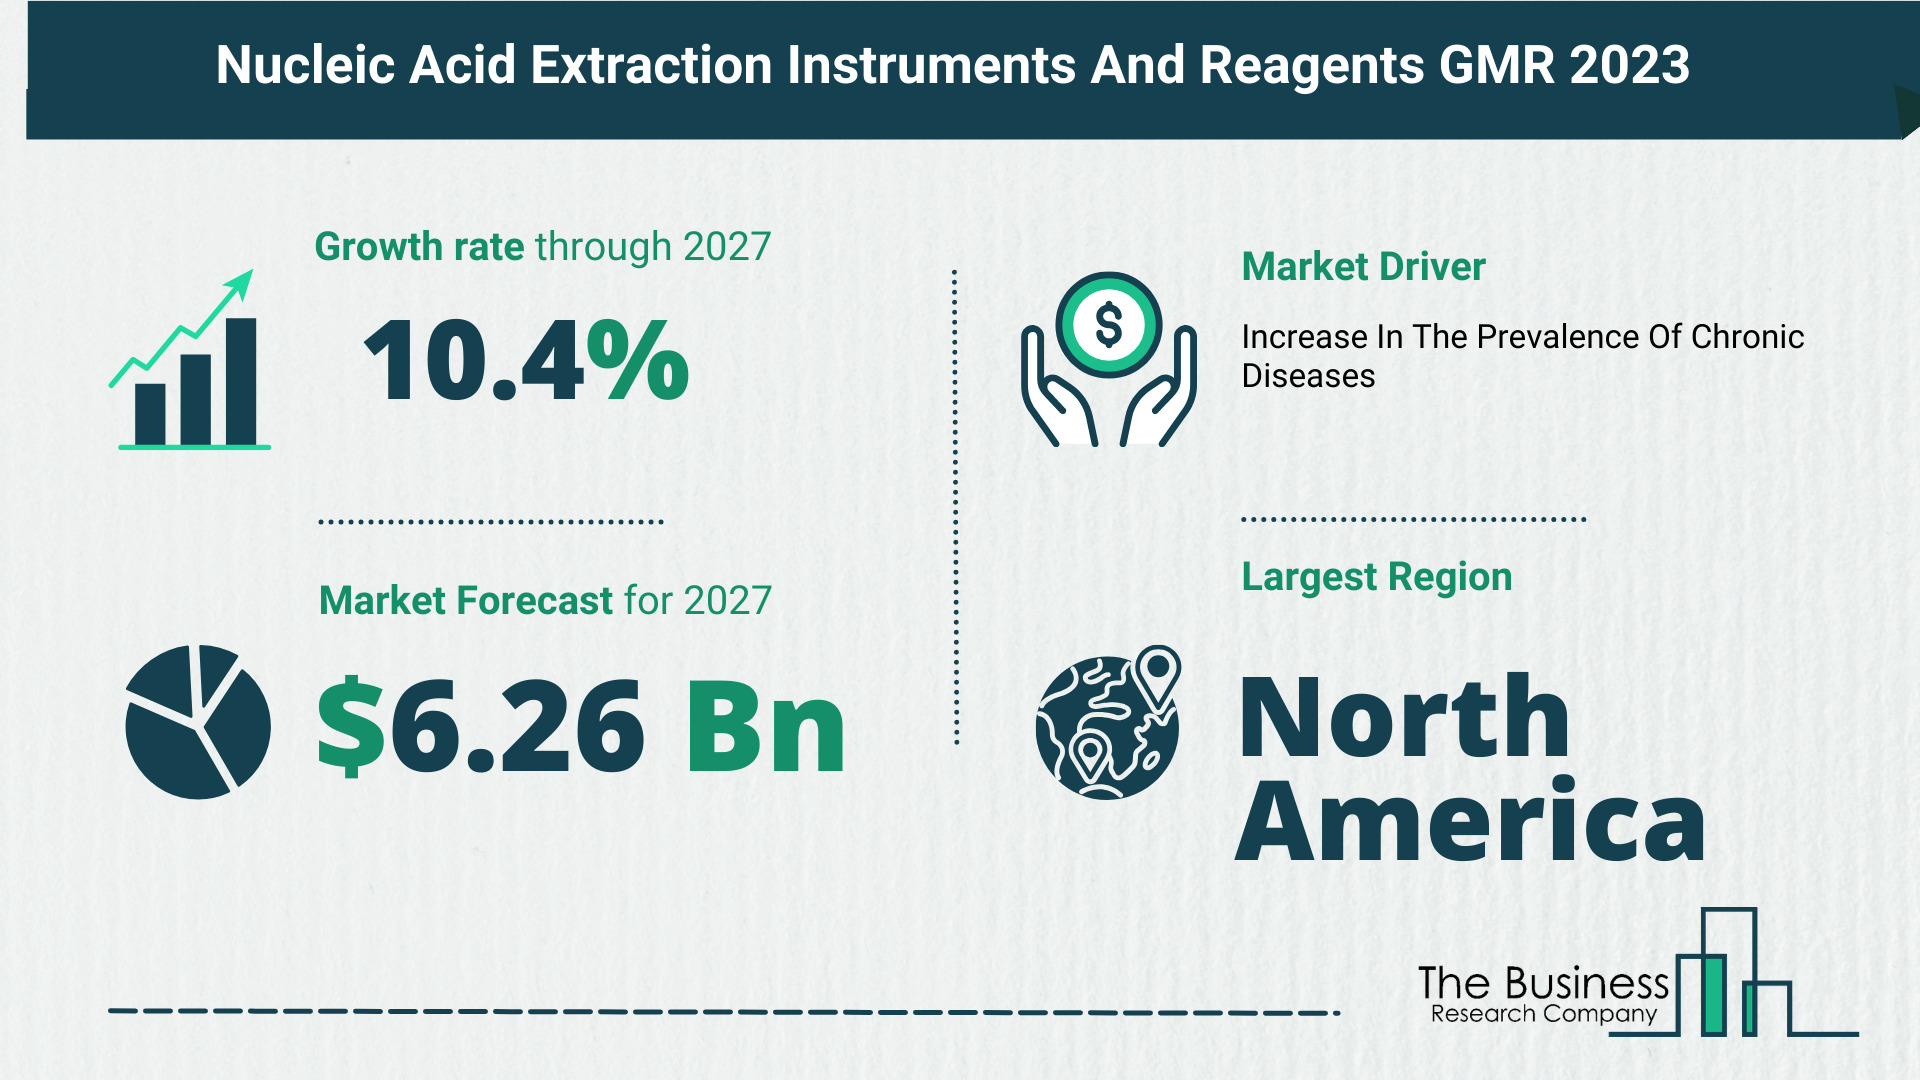 Nucleic Acid Extraction Instruments And Reagents Market Size